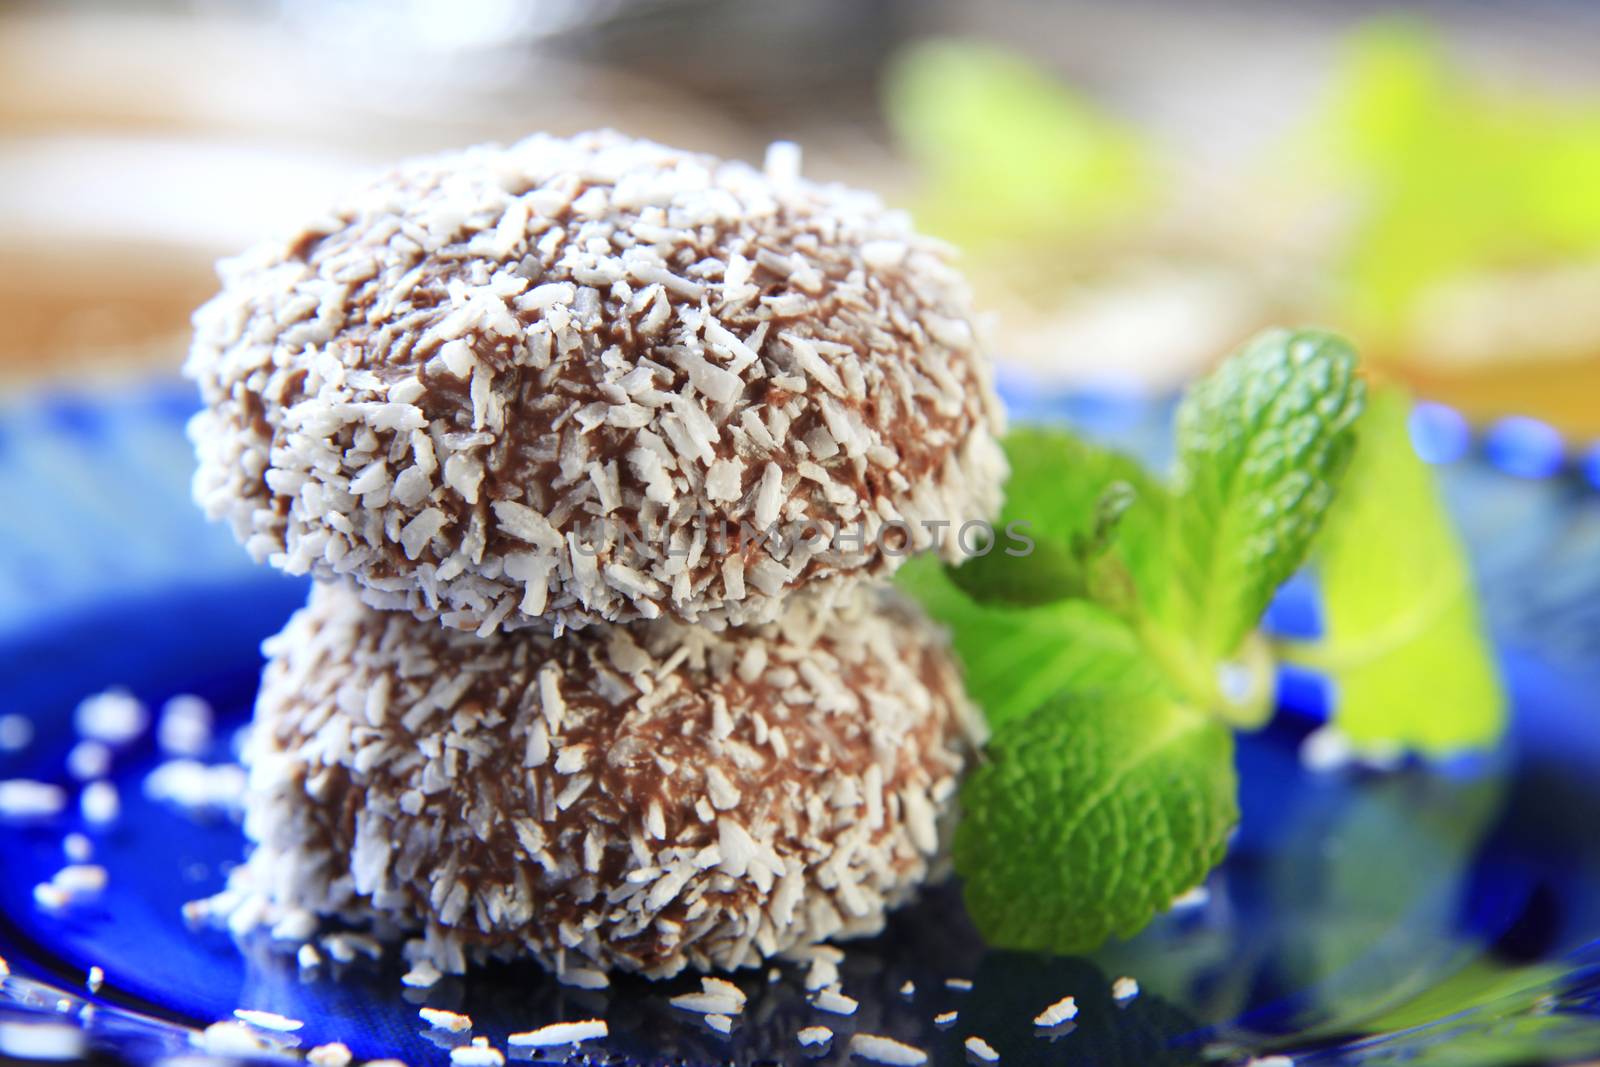 Chocolate coconut confections filled with cream